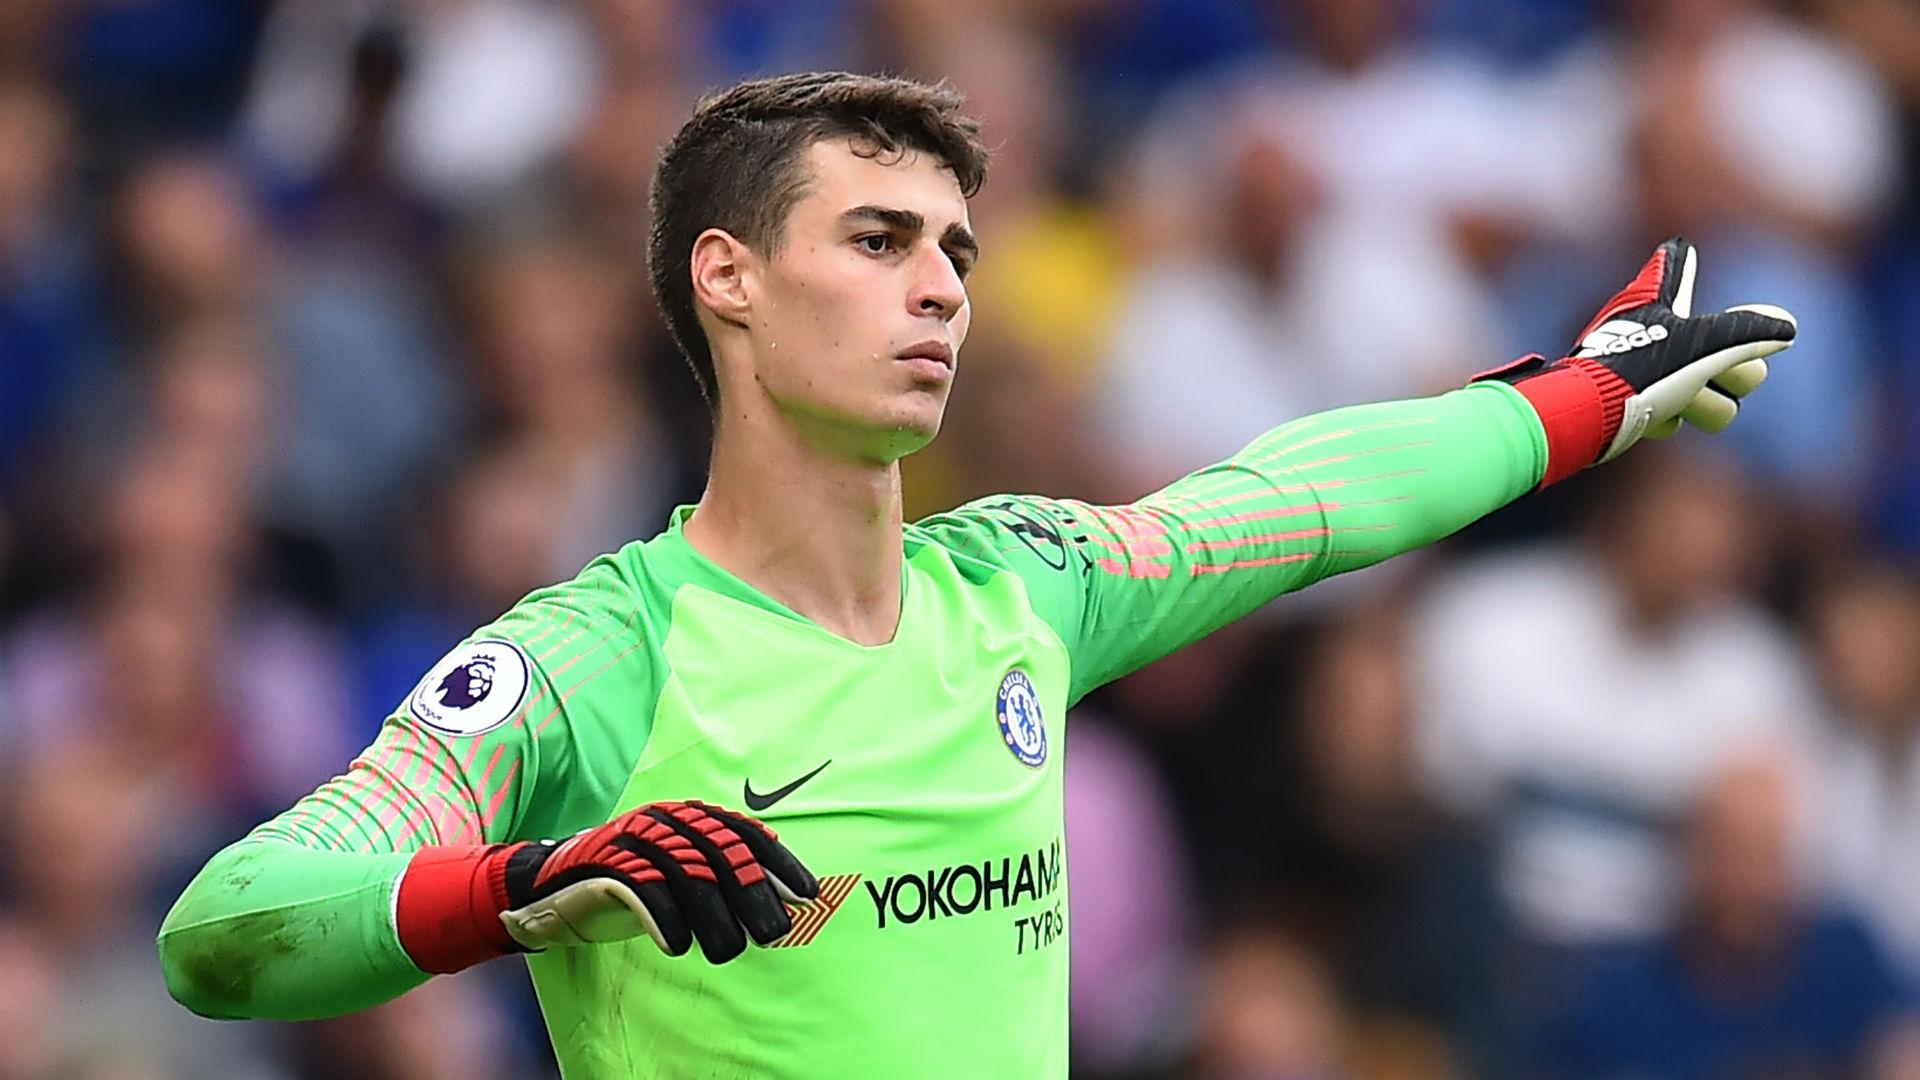 Kepa Arrizabalaga Biography: Things you didn't know about him & net